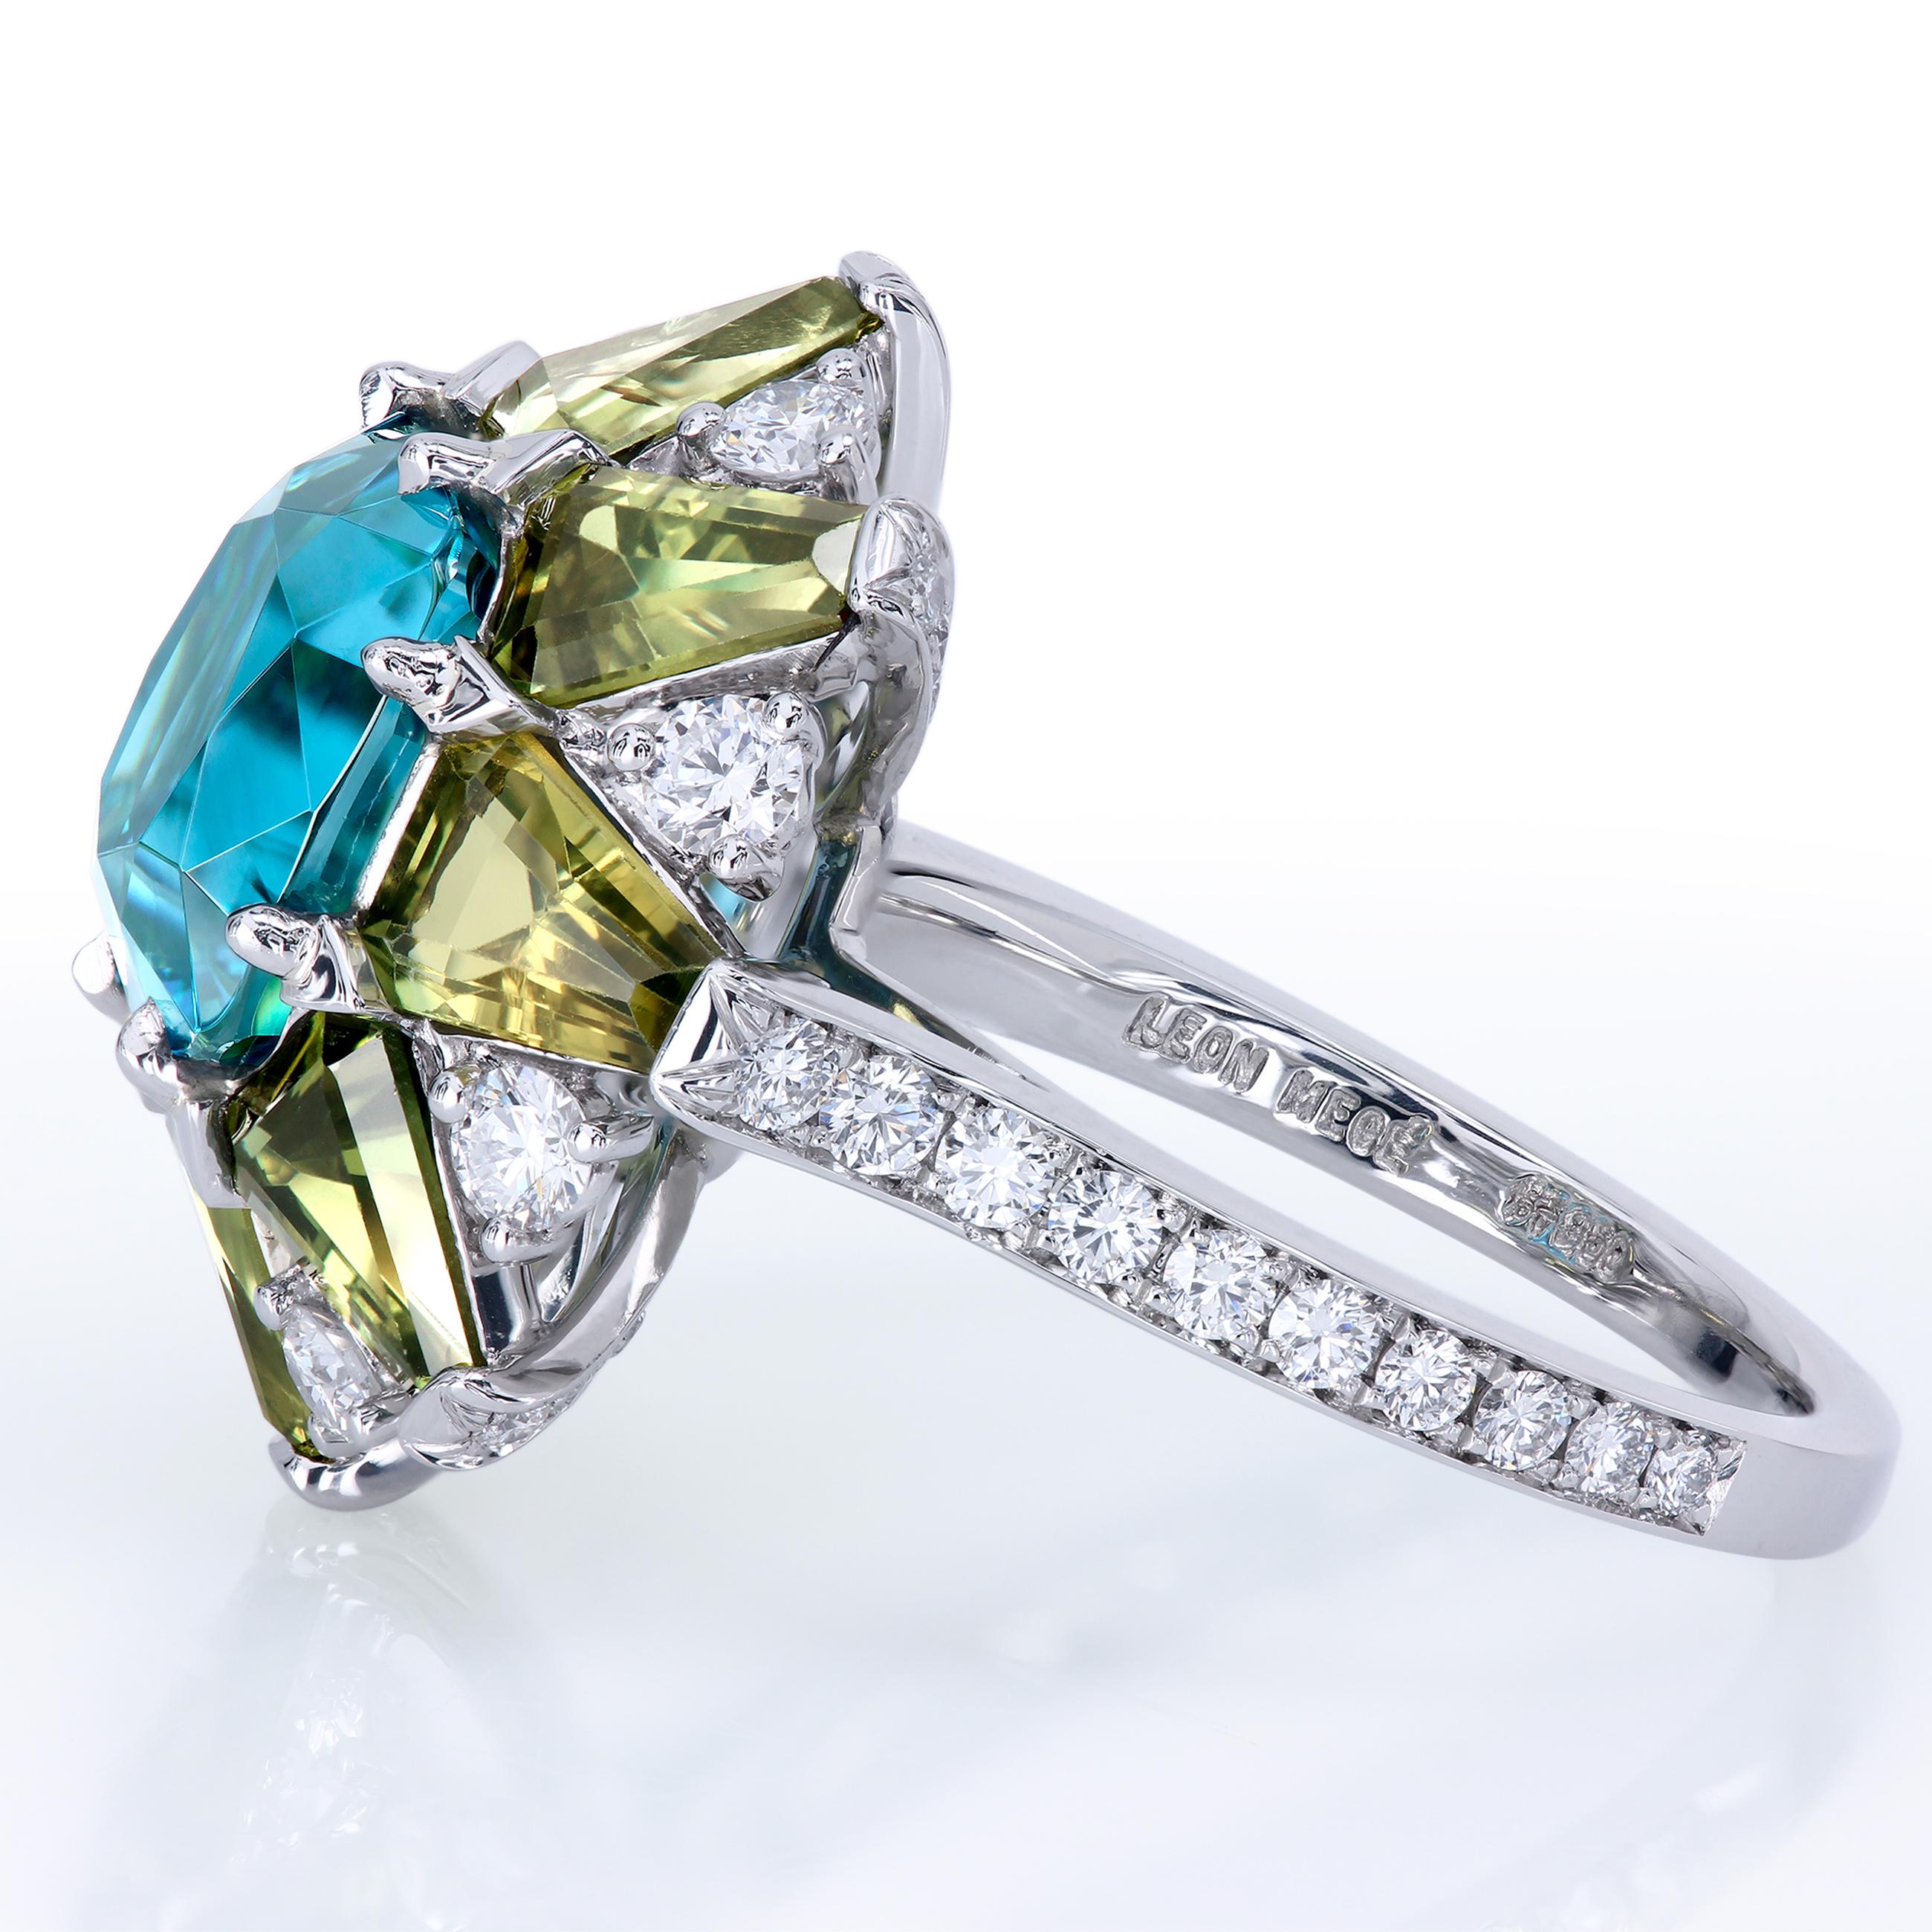 The ultimate right-hand ring with electric-blue 6.63-carat cushion zircon (irradiated) of astonishing intensity and brightness.
Surrounded by eight natural greenish-yellow sapphire baguettes and natural diamonds. Total diamond weight of 58 F-G/VS